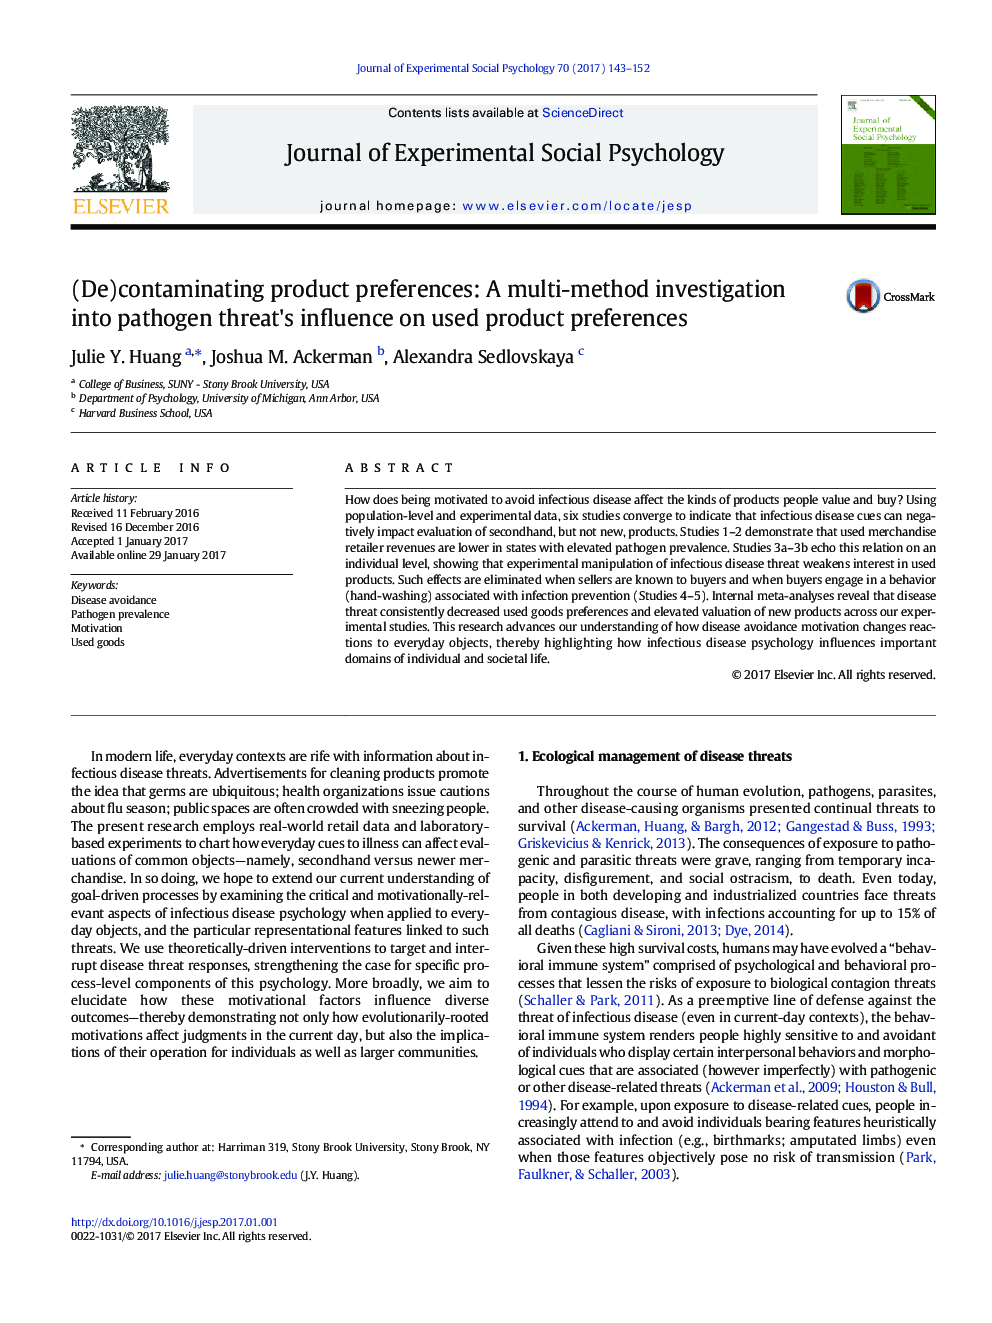 (De)contaminating product preferences: A multi-method investigation into pathogen threat's influence on used product preferences